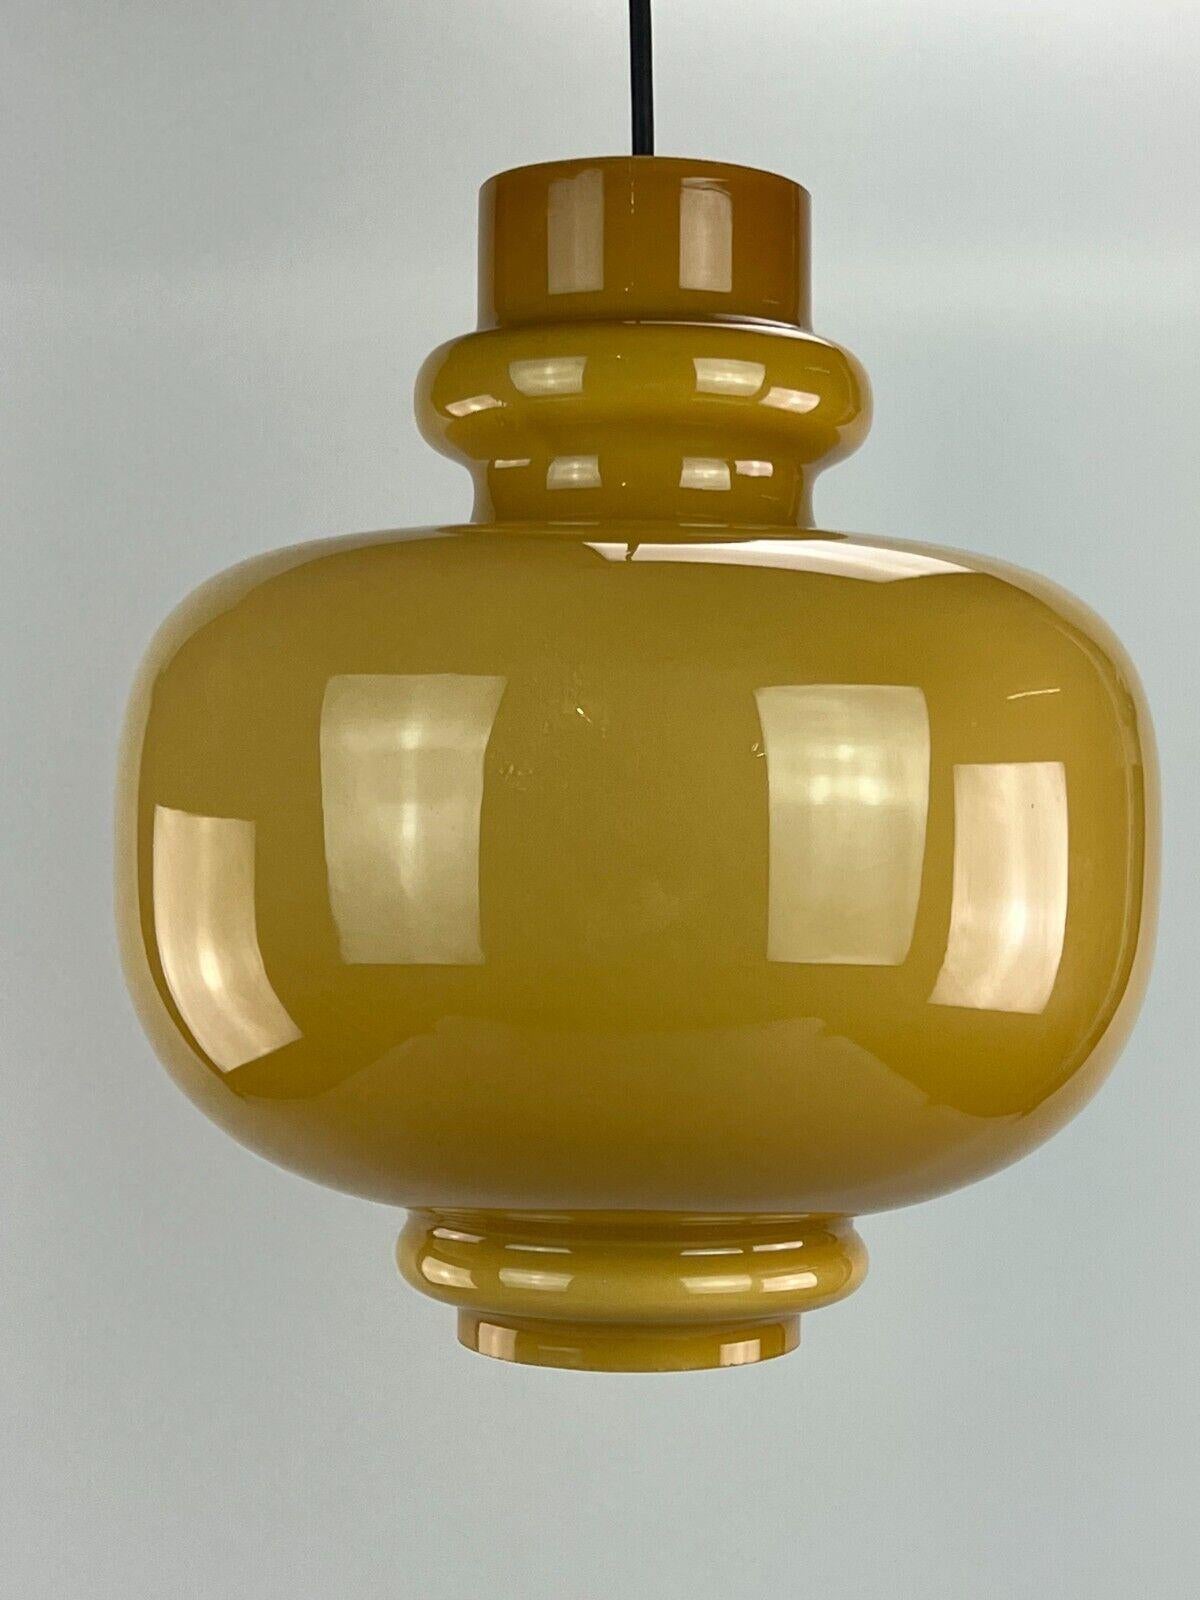 60s 70s Lamp Light Hanging Lamp Hans Agne Jakobsson for Staff Mustard Yellow In Good Condition For Sale In Neuenkirchen, NI